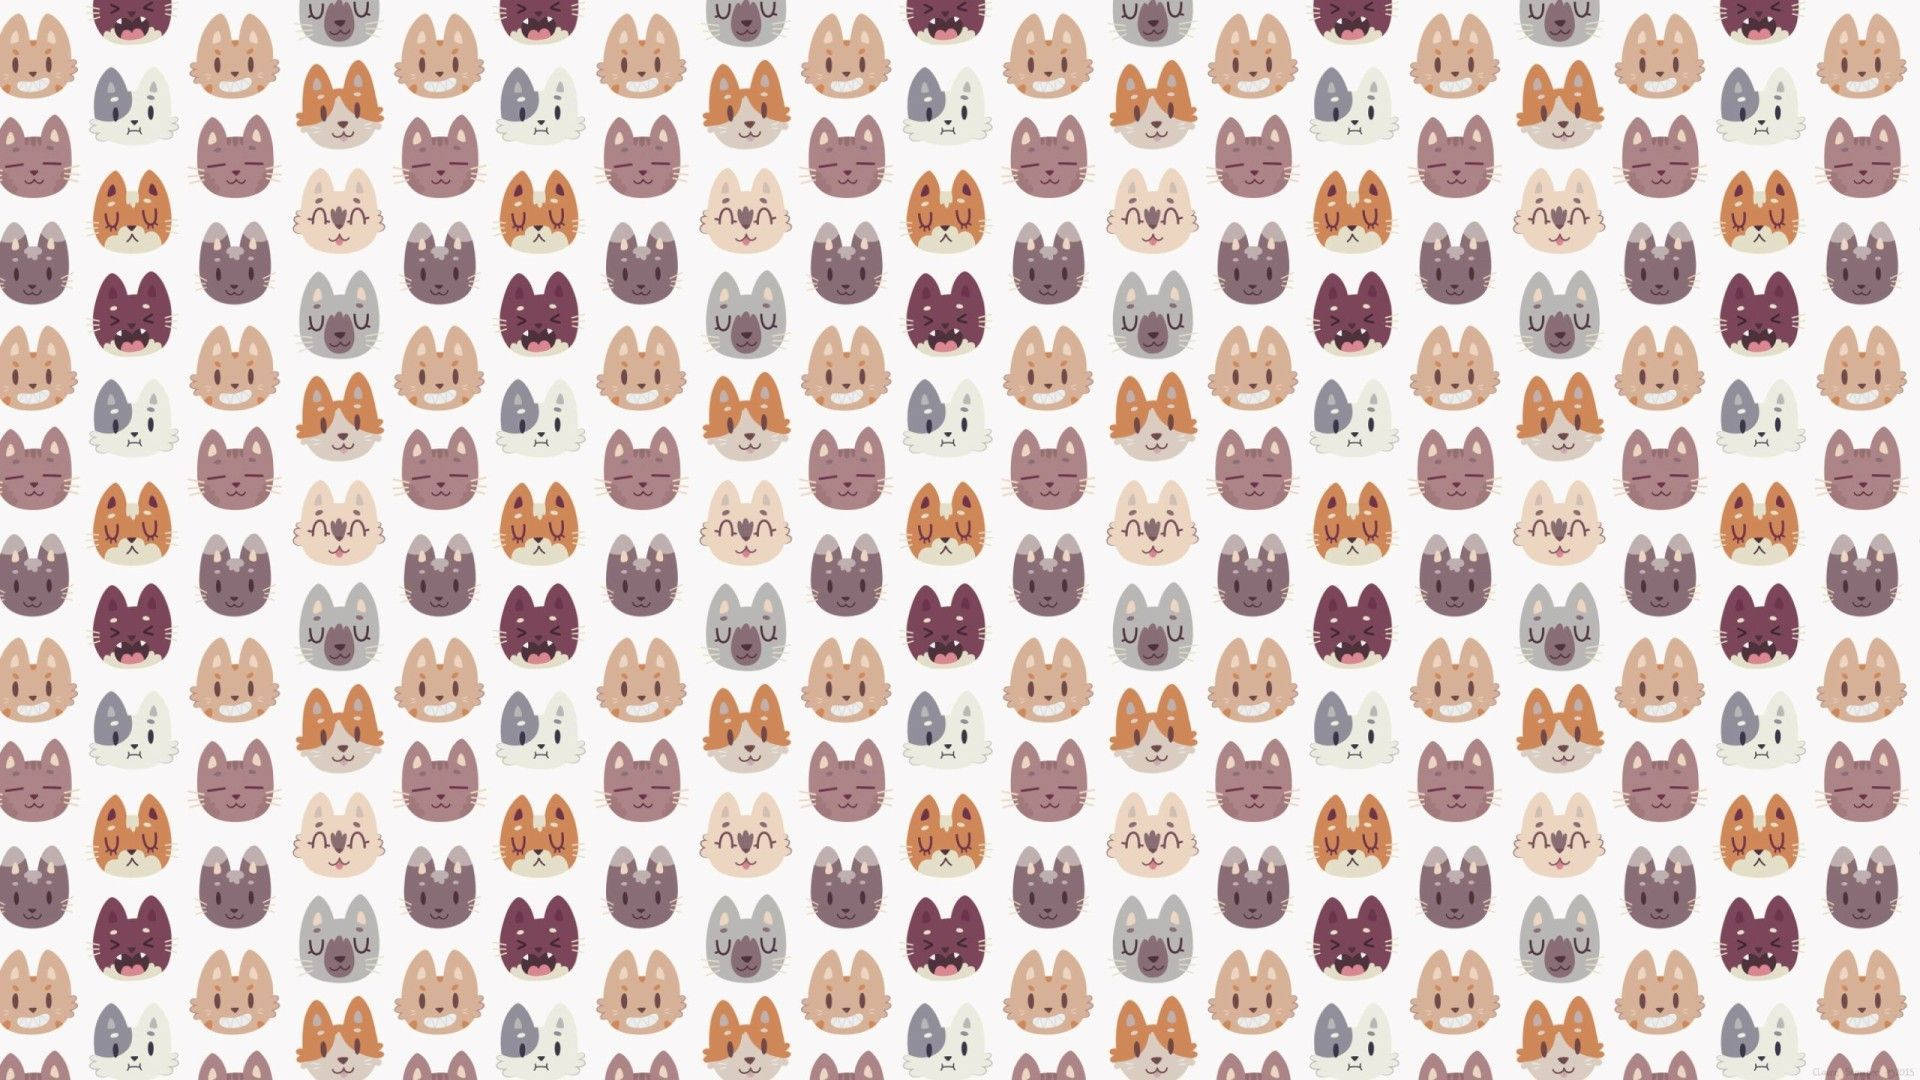 Foxes And Cats Tumblr Aesthetic Background